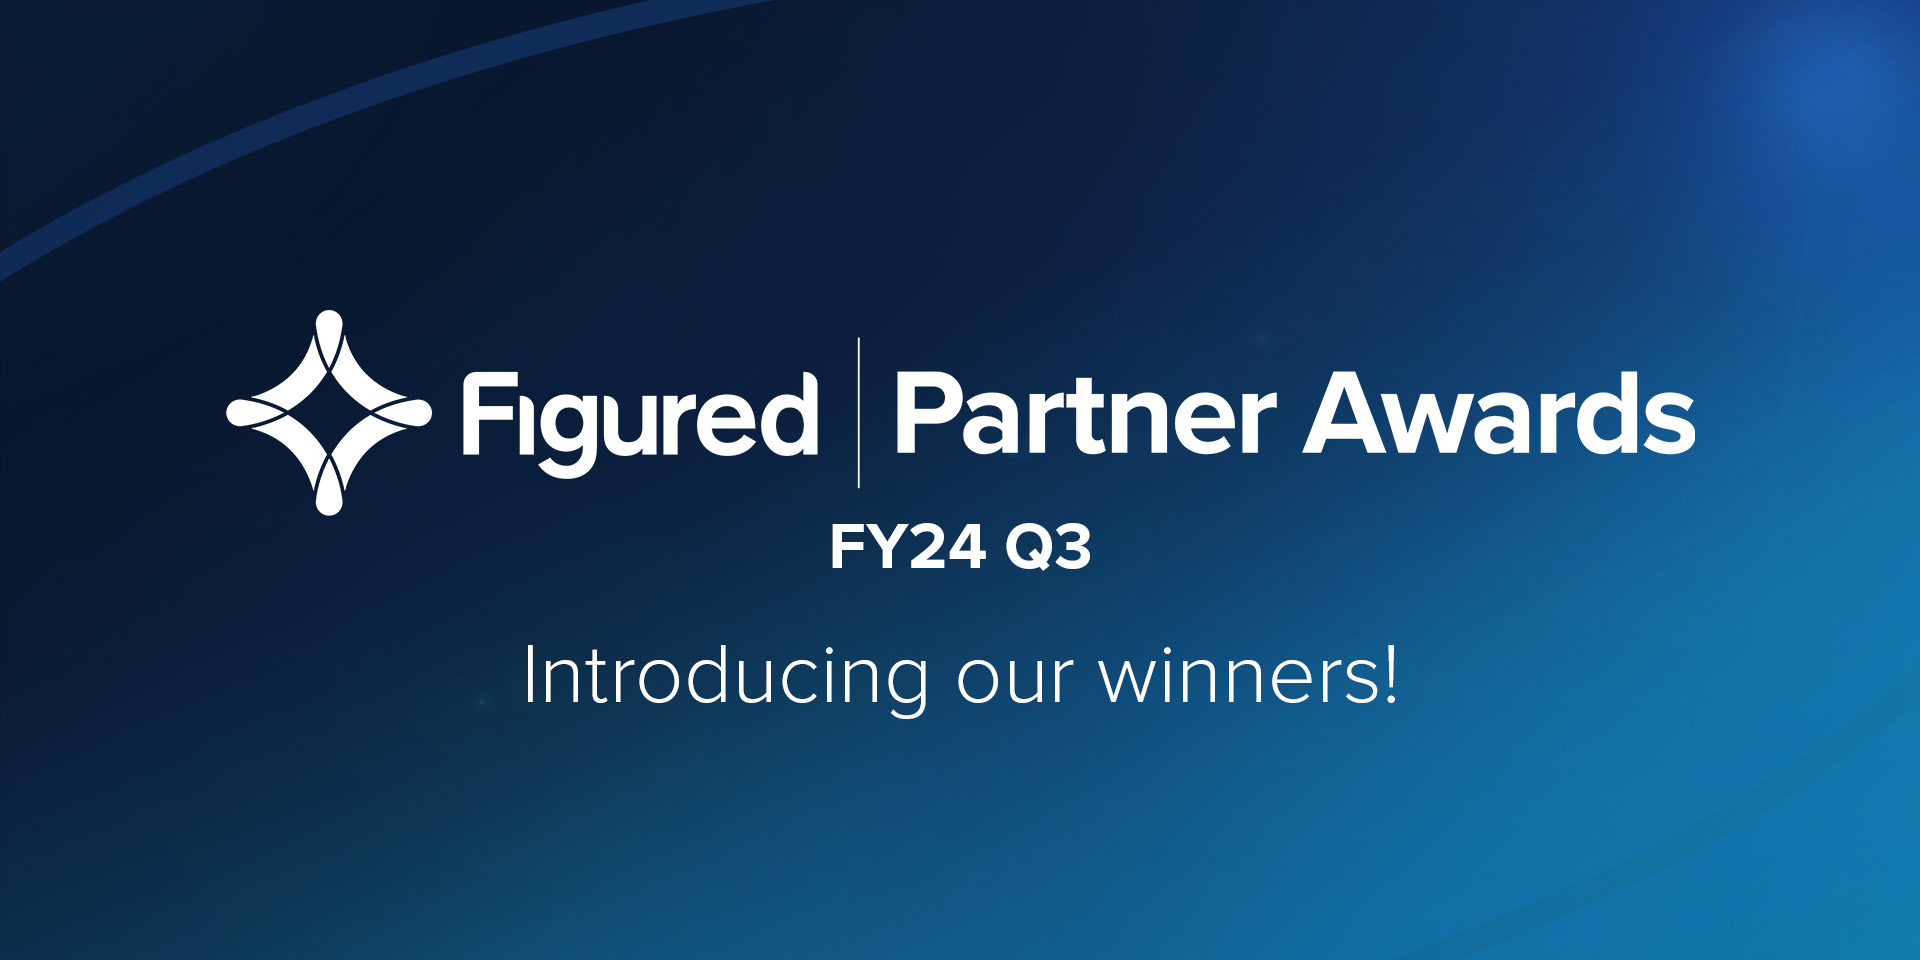 Introducing our inaugural Quarterly Figured Partner Awards winners!